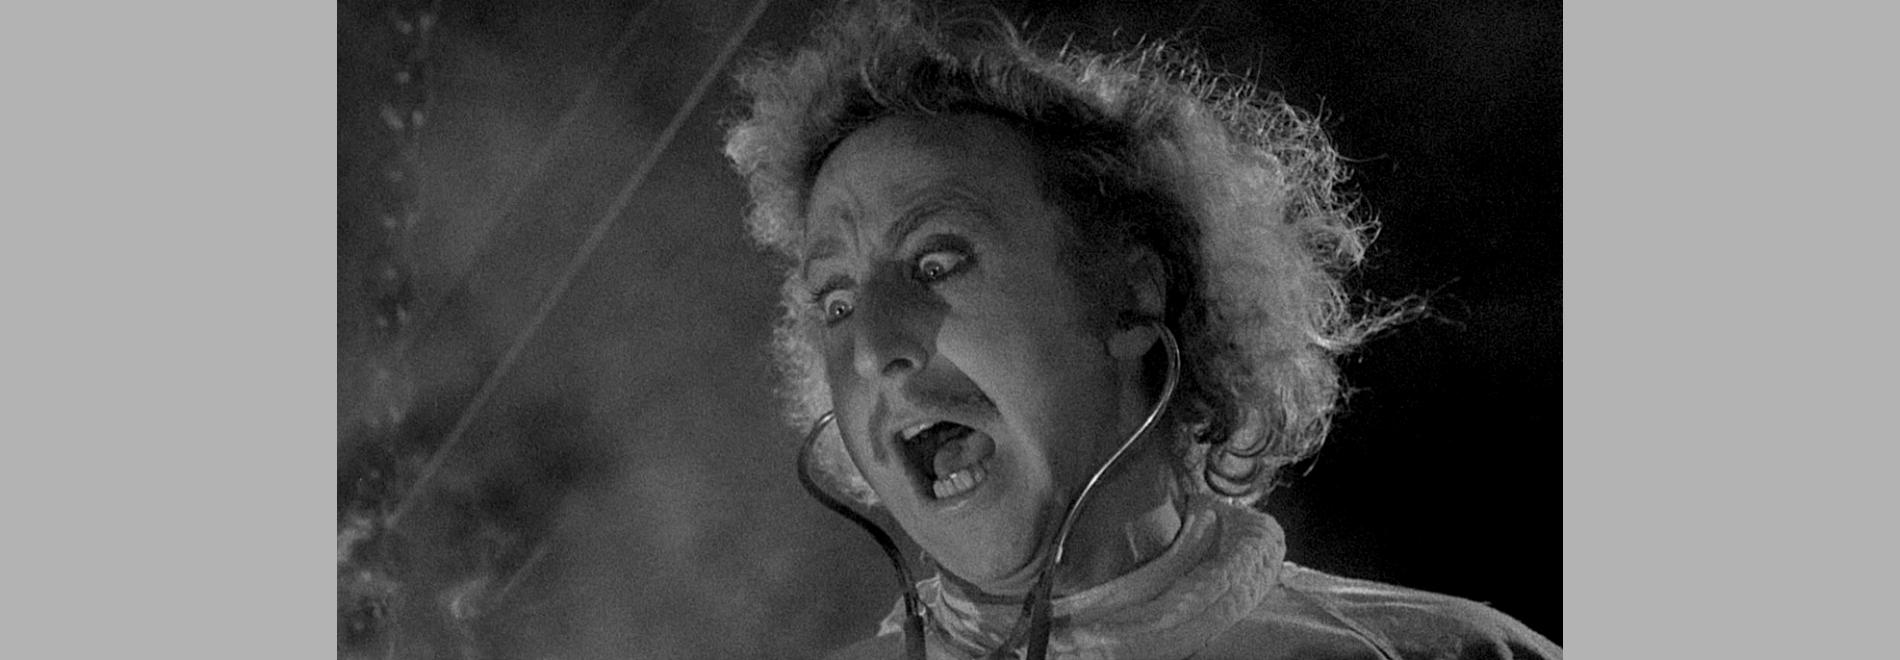 The Young Frankenstein (Mel Brooks, 1974)